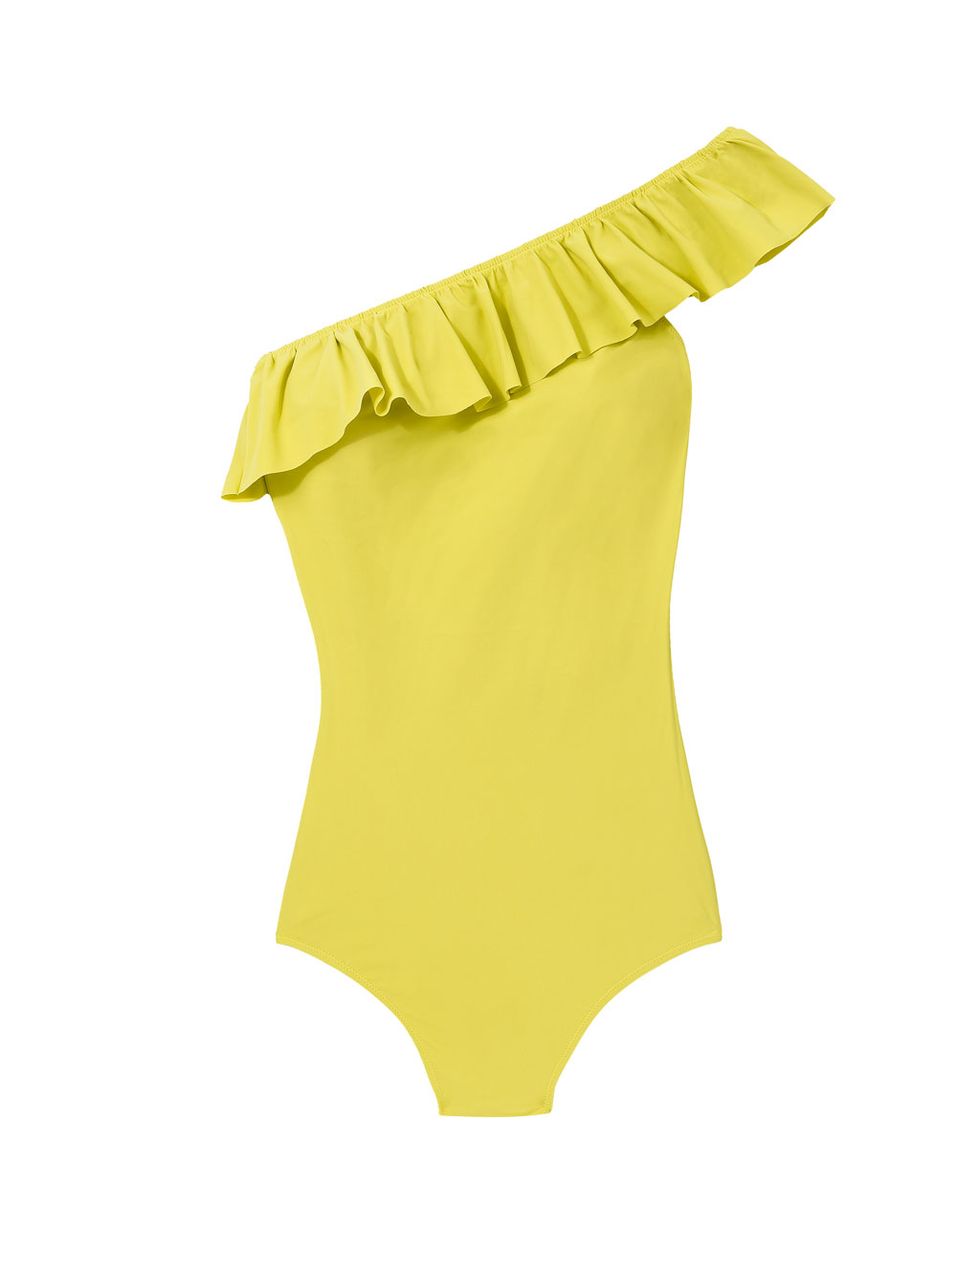 Clothing, Yellow, Product, One-piece swimsuit, Swimsuit bottom, Swimwear, Leotard, Briefs, Baby & toddler clothing, Swim brief, 